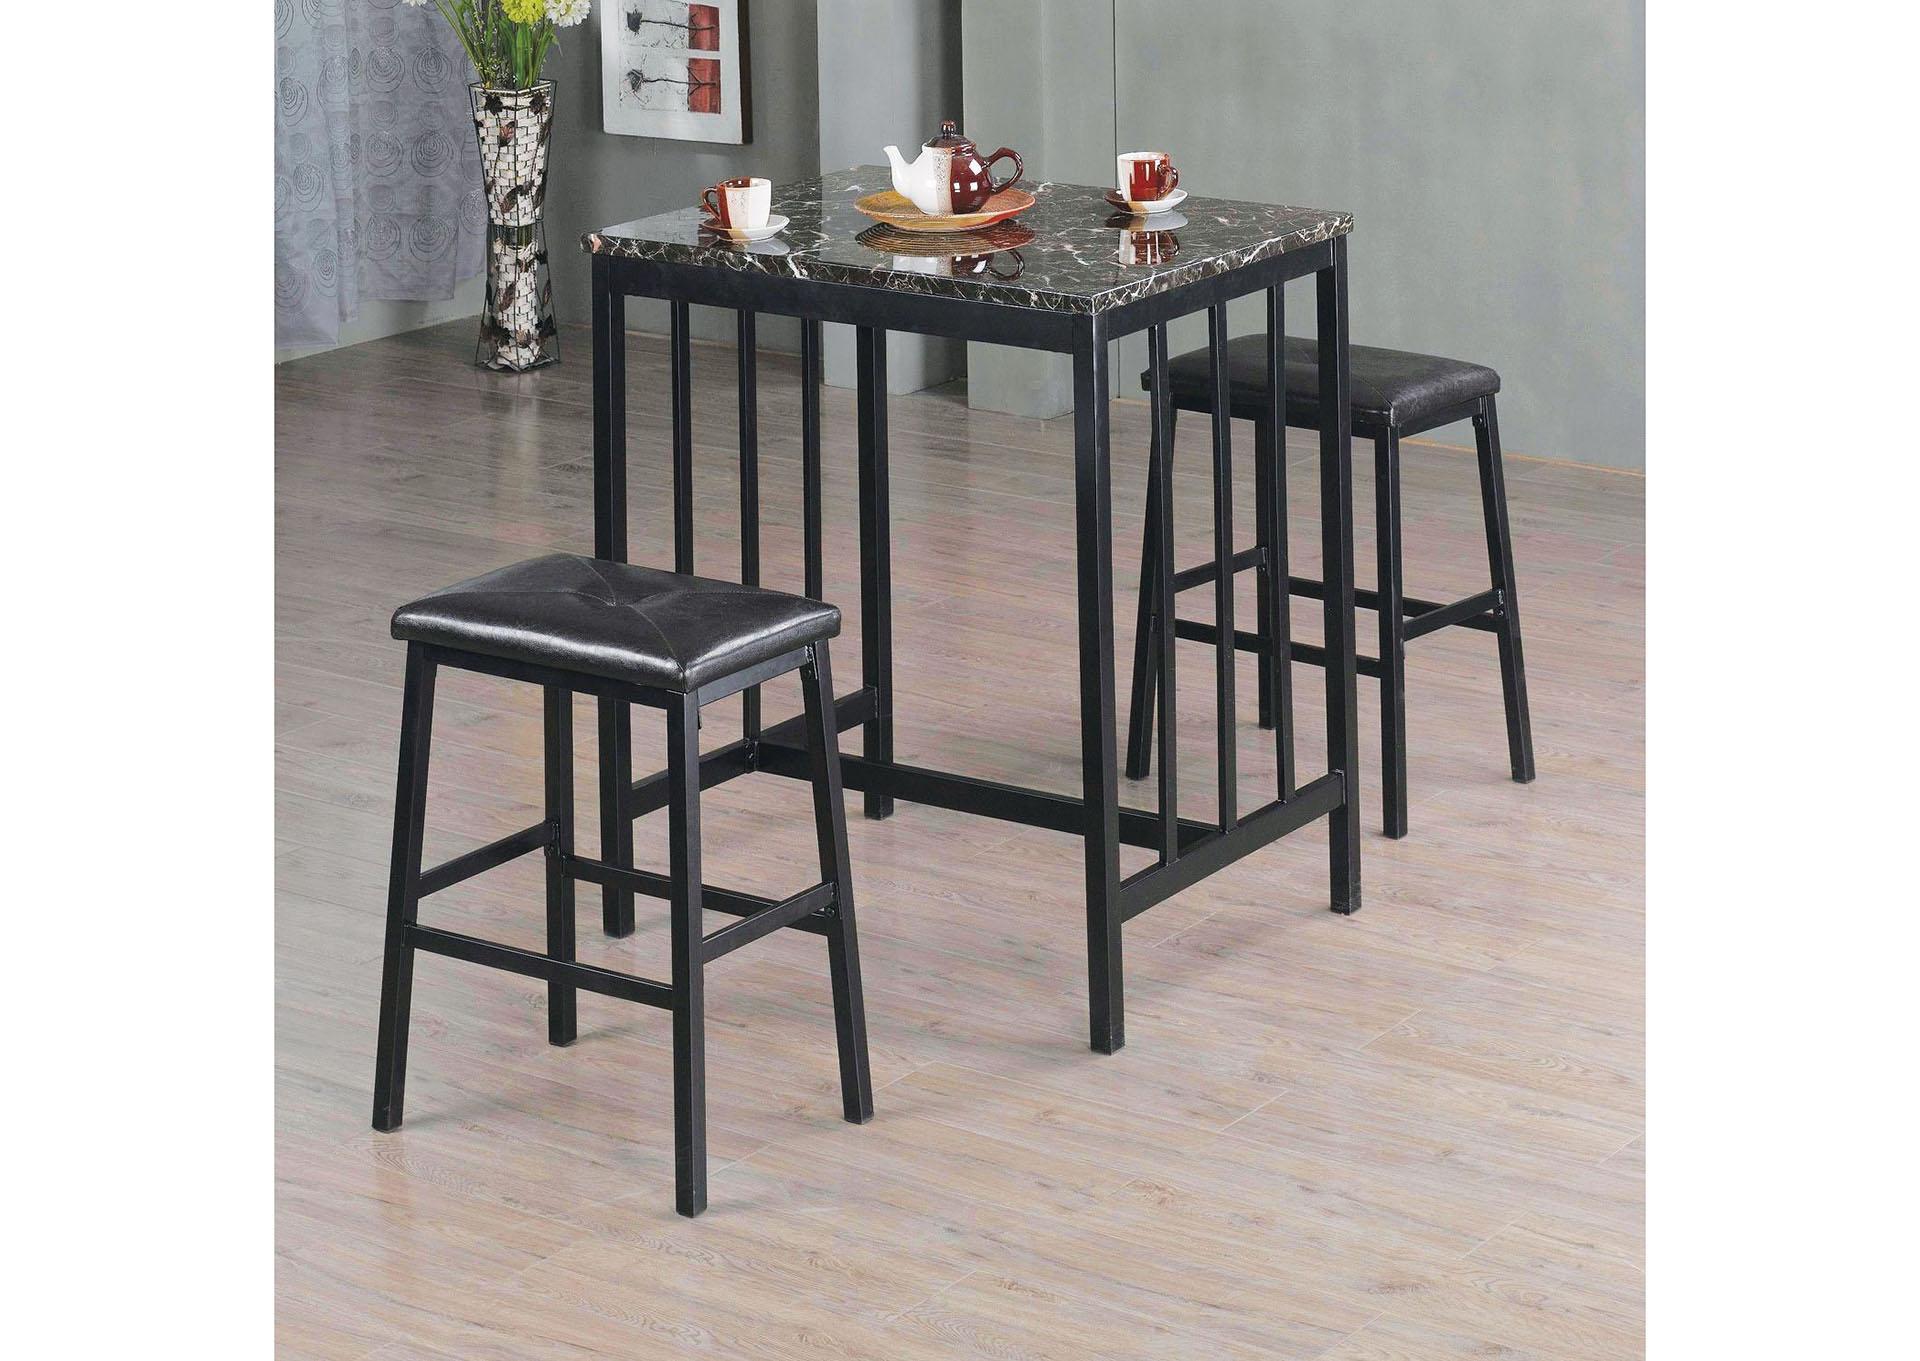 Table & 2 Chairs,On Display Products